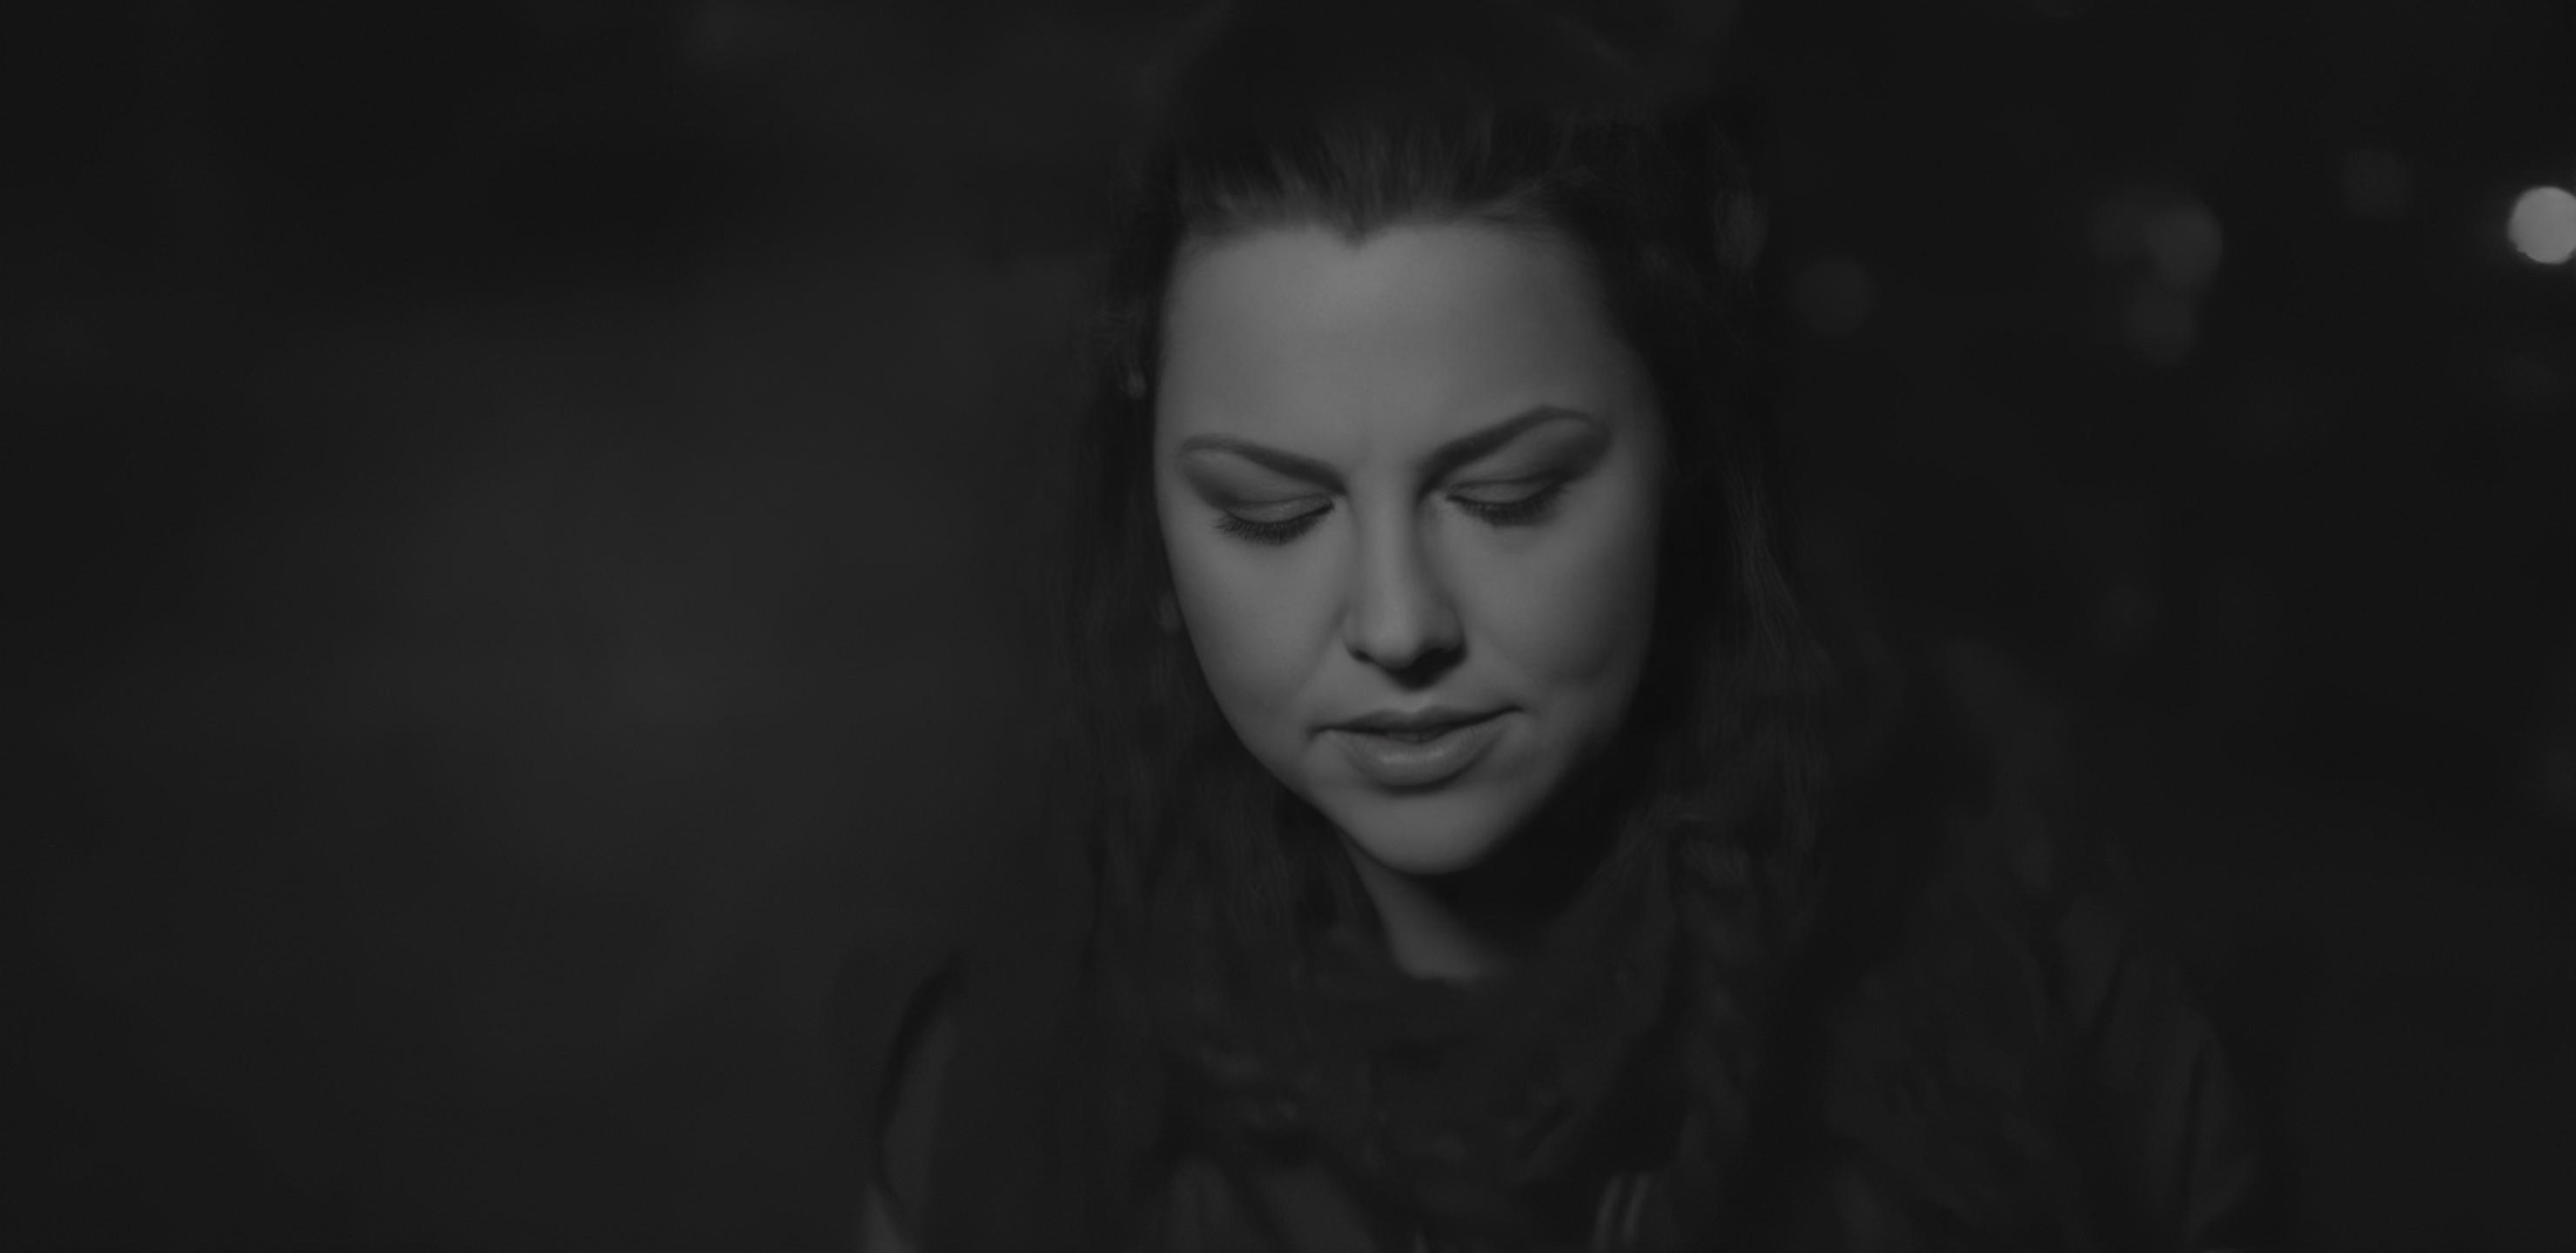 2960x1440
Keywords: amy lee;recover;baby did a bad bad thing;video